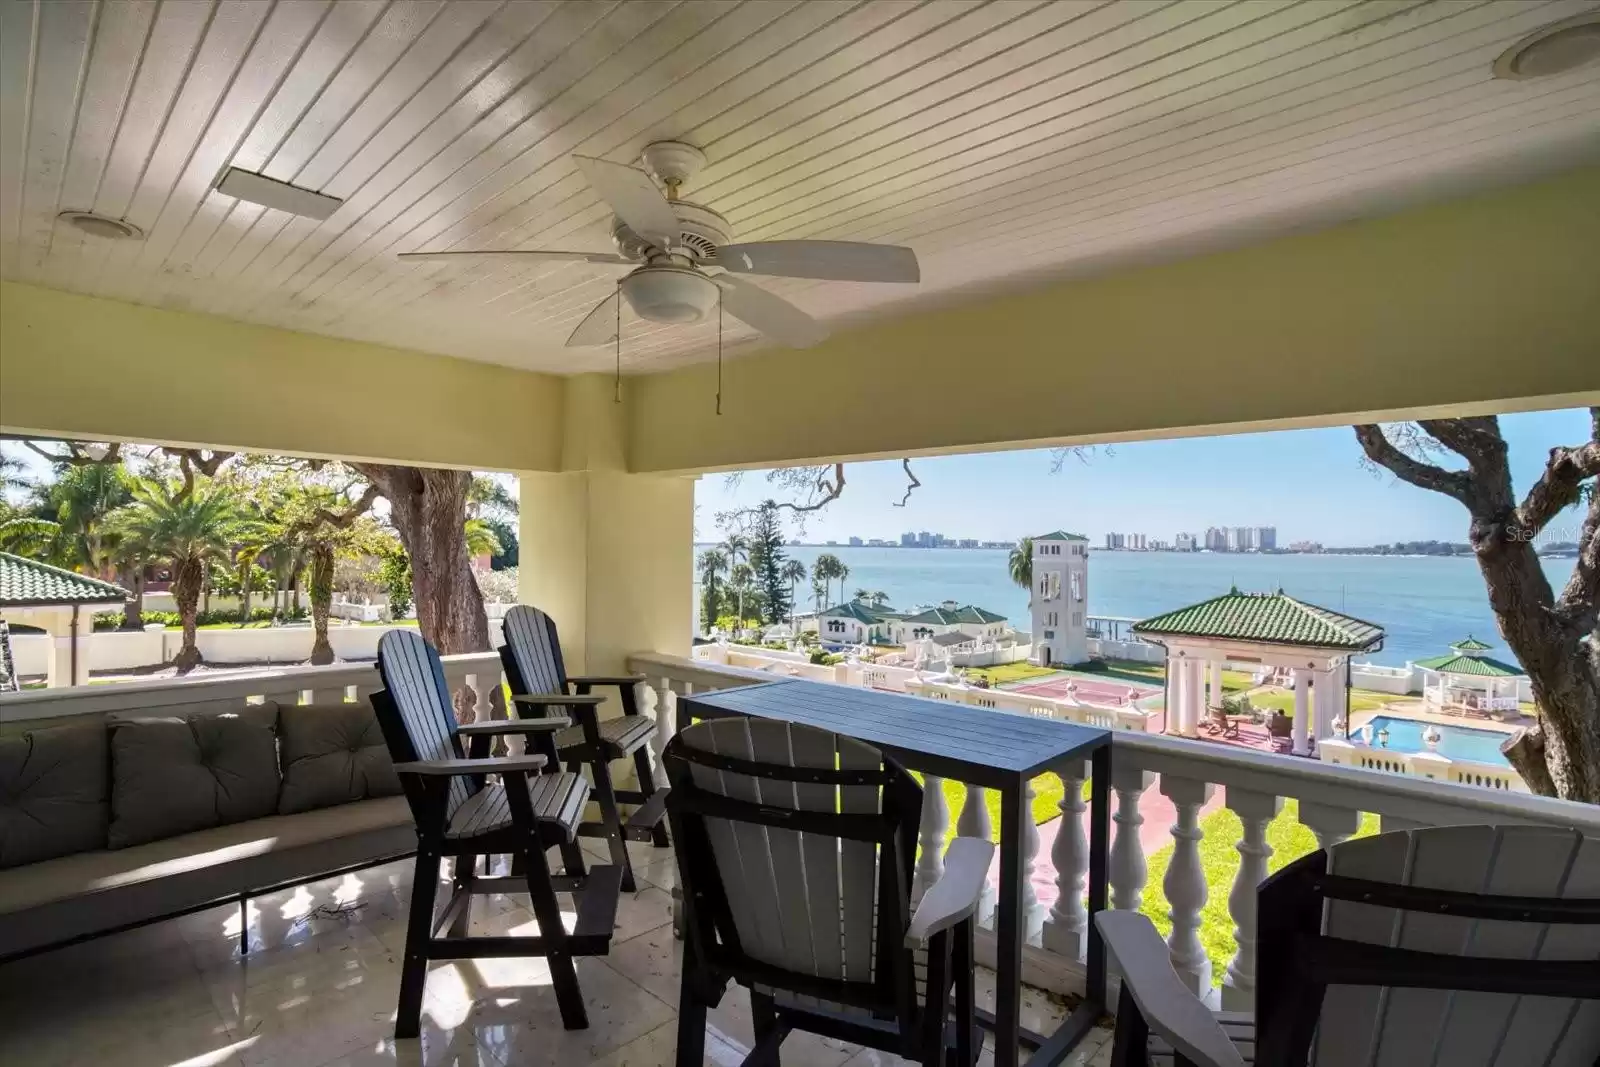 Enjoy your morning coffee on the private terrace located off the Master Suite